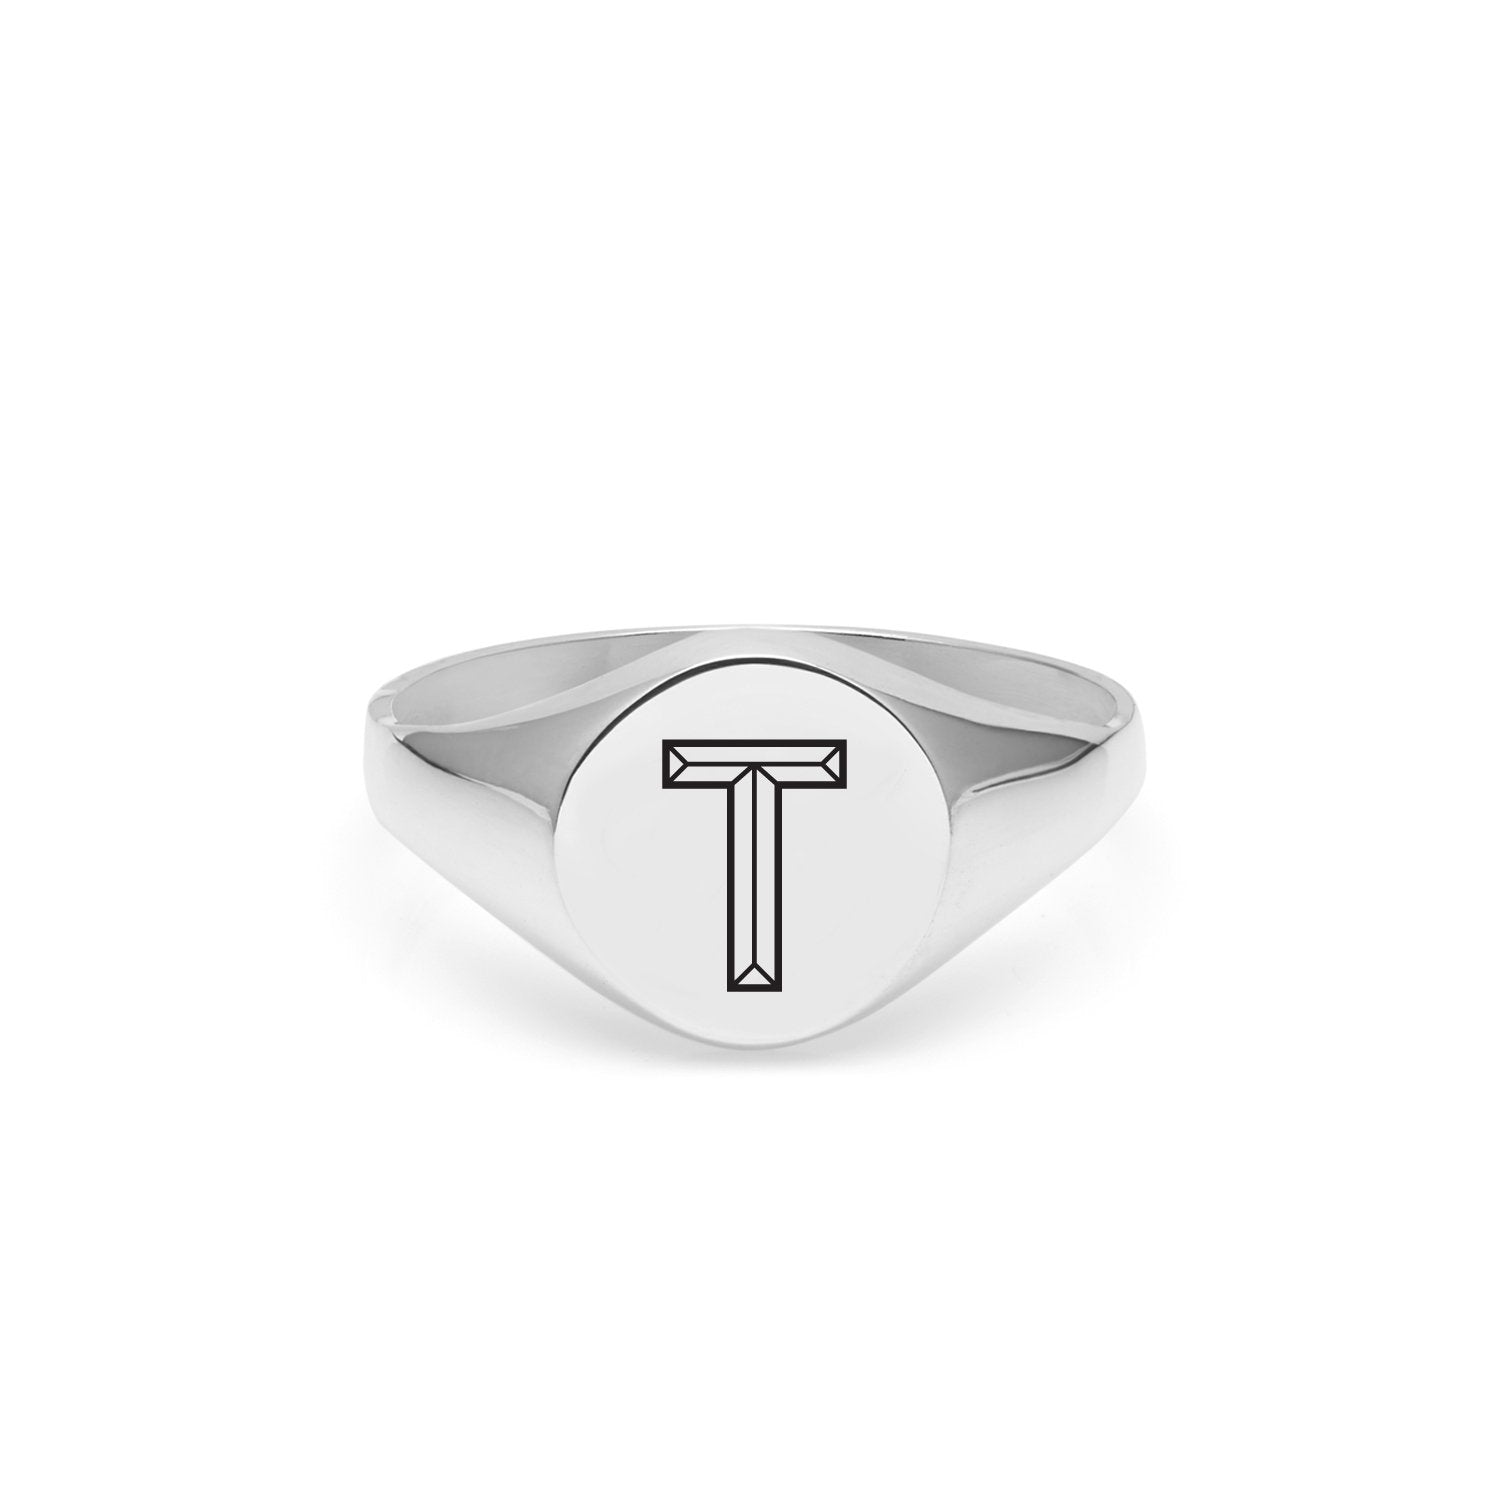 Facett Initial T Round Signet Ring - Silver - Myia Bonner Jewellery